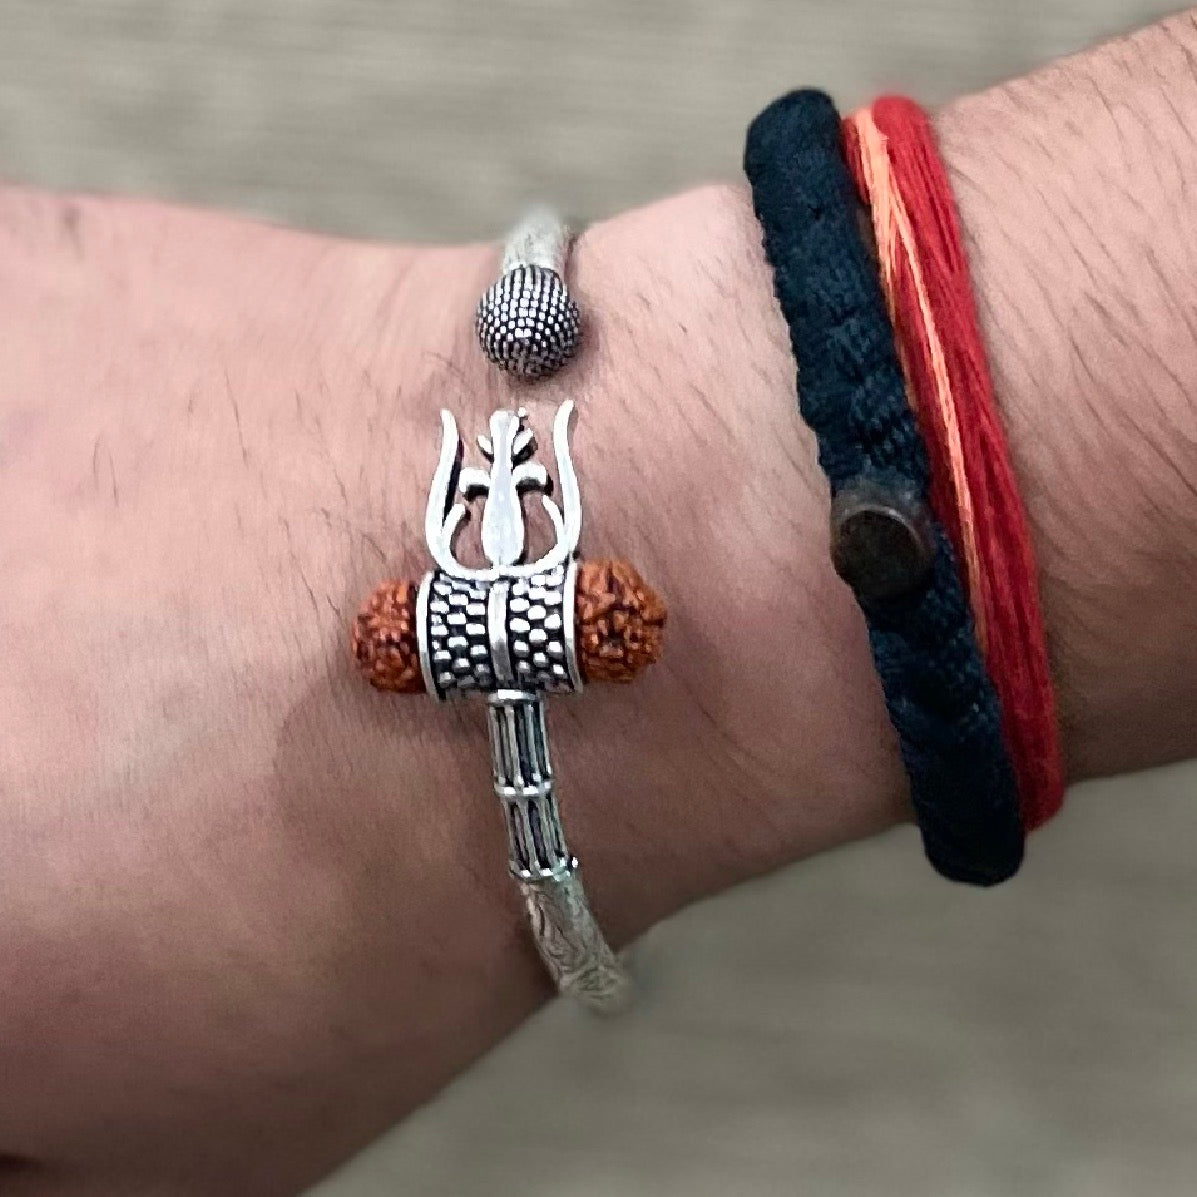 Buy 925 Sterling Silver Handmade Gorgeous Customized Lord Shiva Bangle  Bracelet, Excellent Trident Trishul With Rudraksha Unisex Jewelry Nssk21  Online in India - Etsy